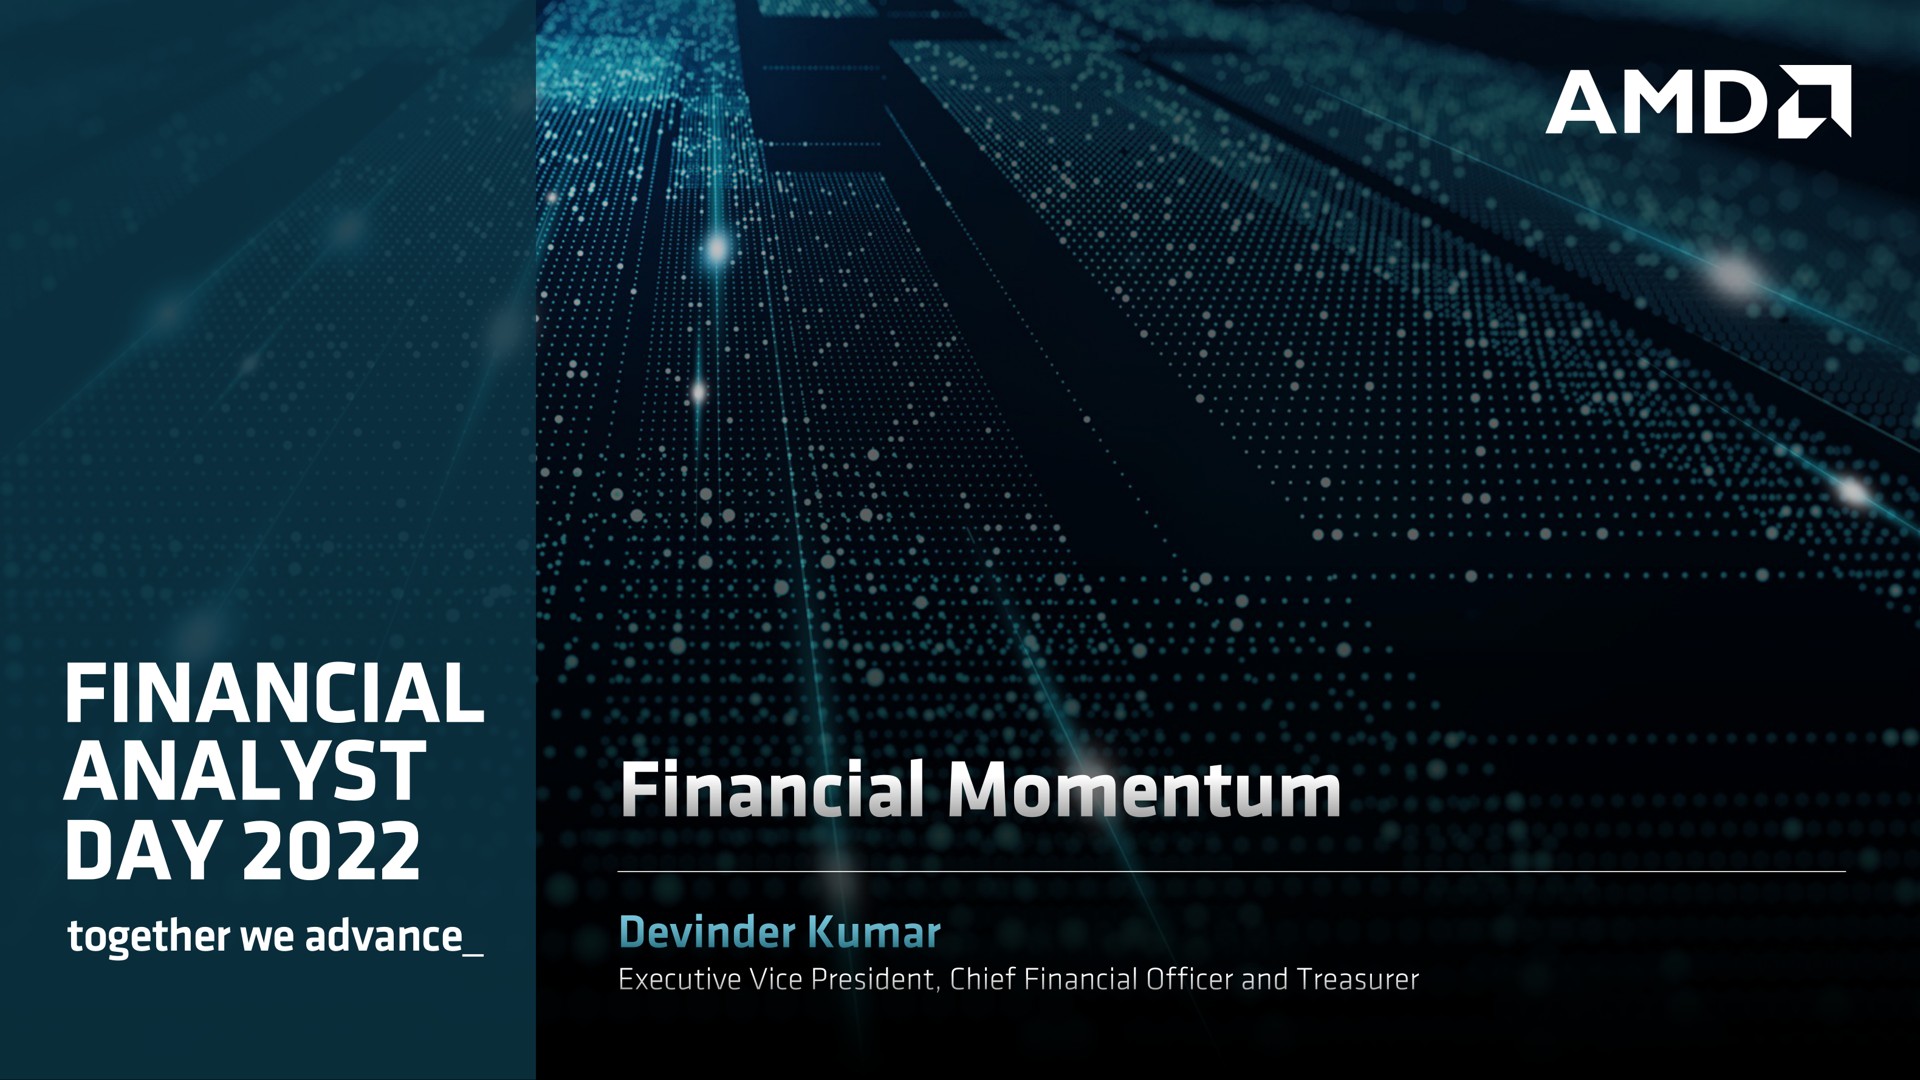 financial analyst day together we advance momentum | AMD